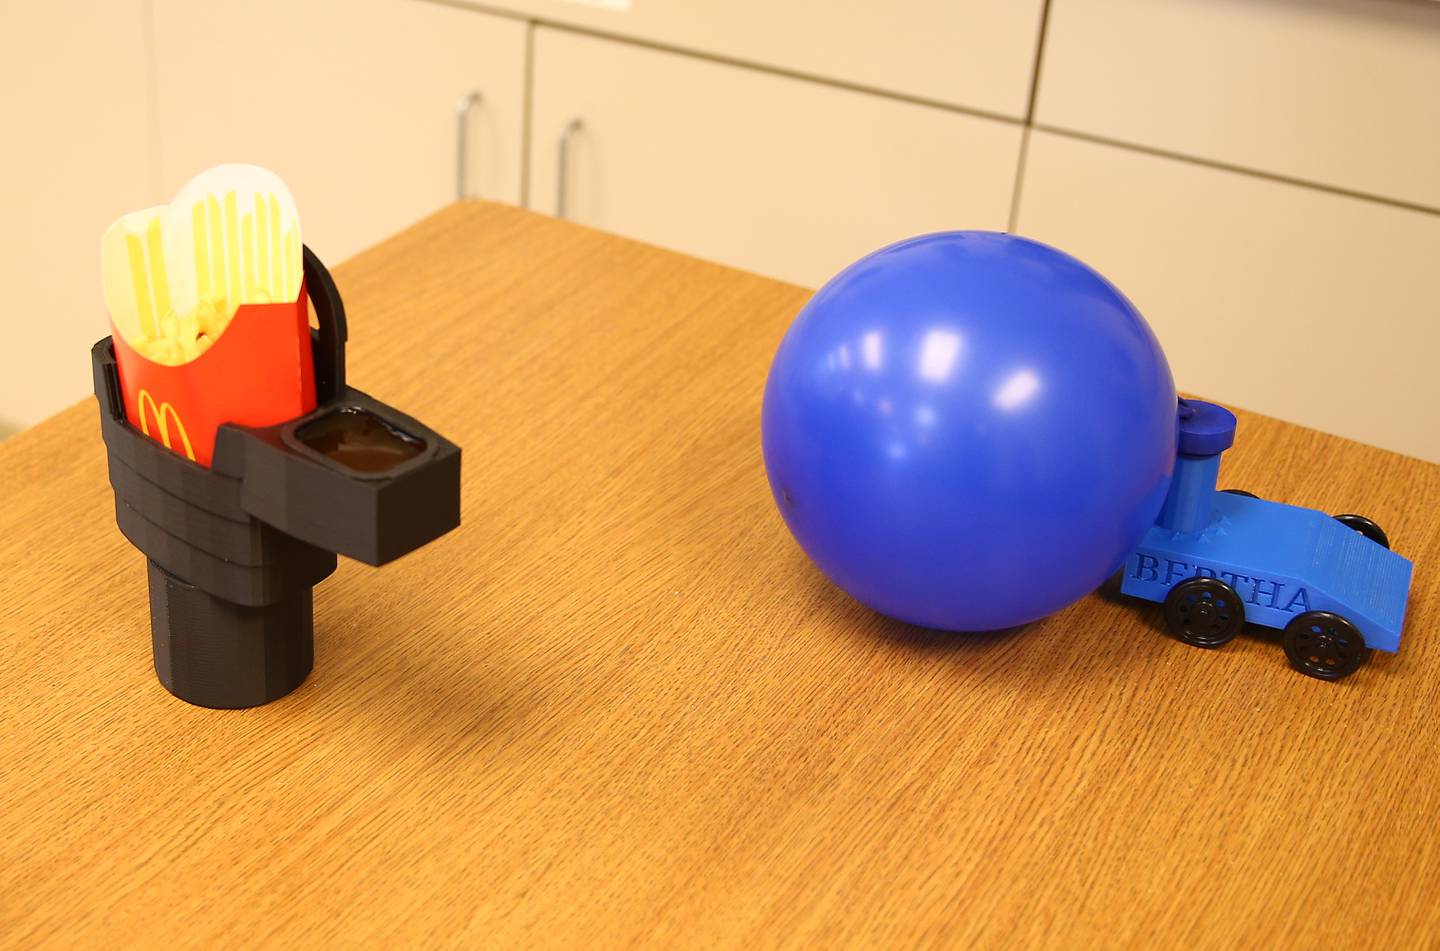 Students Joey Libhart and Brayden Brewer, created and designed these 3-D printed objects in Mrs. Kathy Ferko's STEM class at Wallace Grade School on Thursday, April 7, 2022 in Wallace.  Brewer, made a holder that rests fast food into a vehicle drink tray including condiments while Libhart, designed a car that moves attached to a balloon.